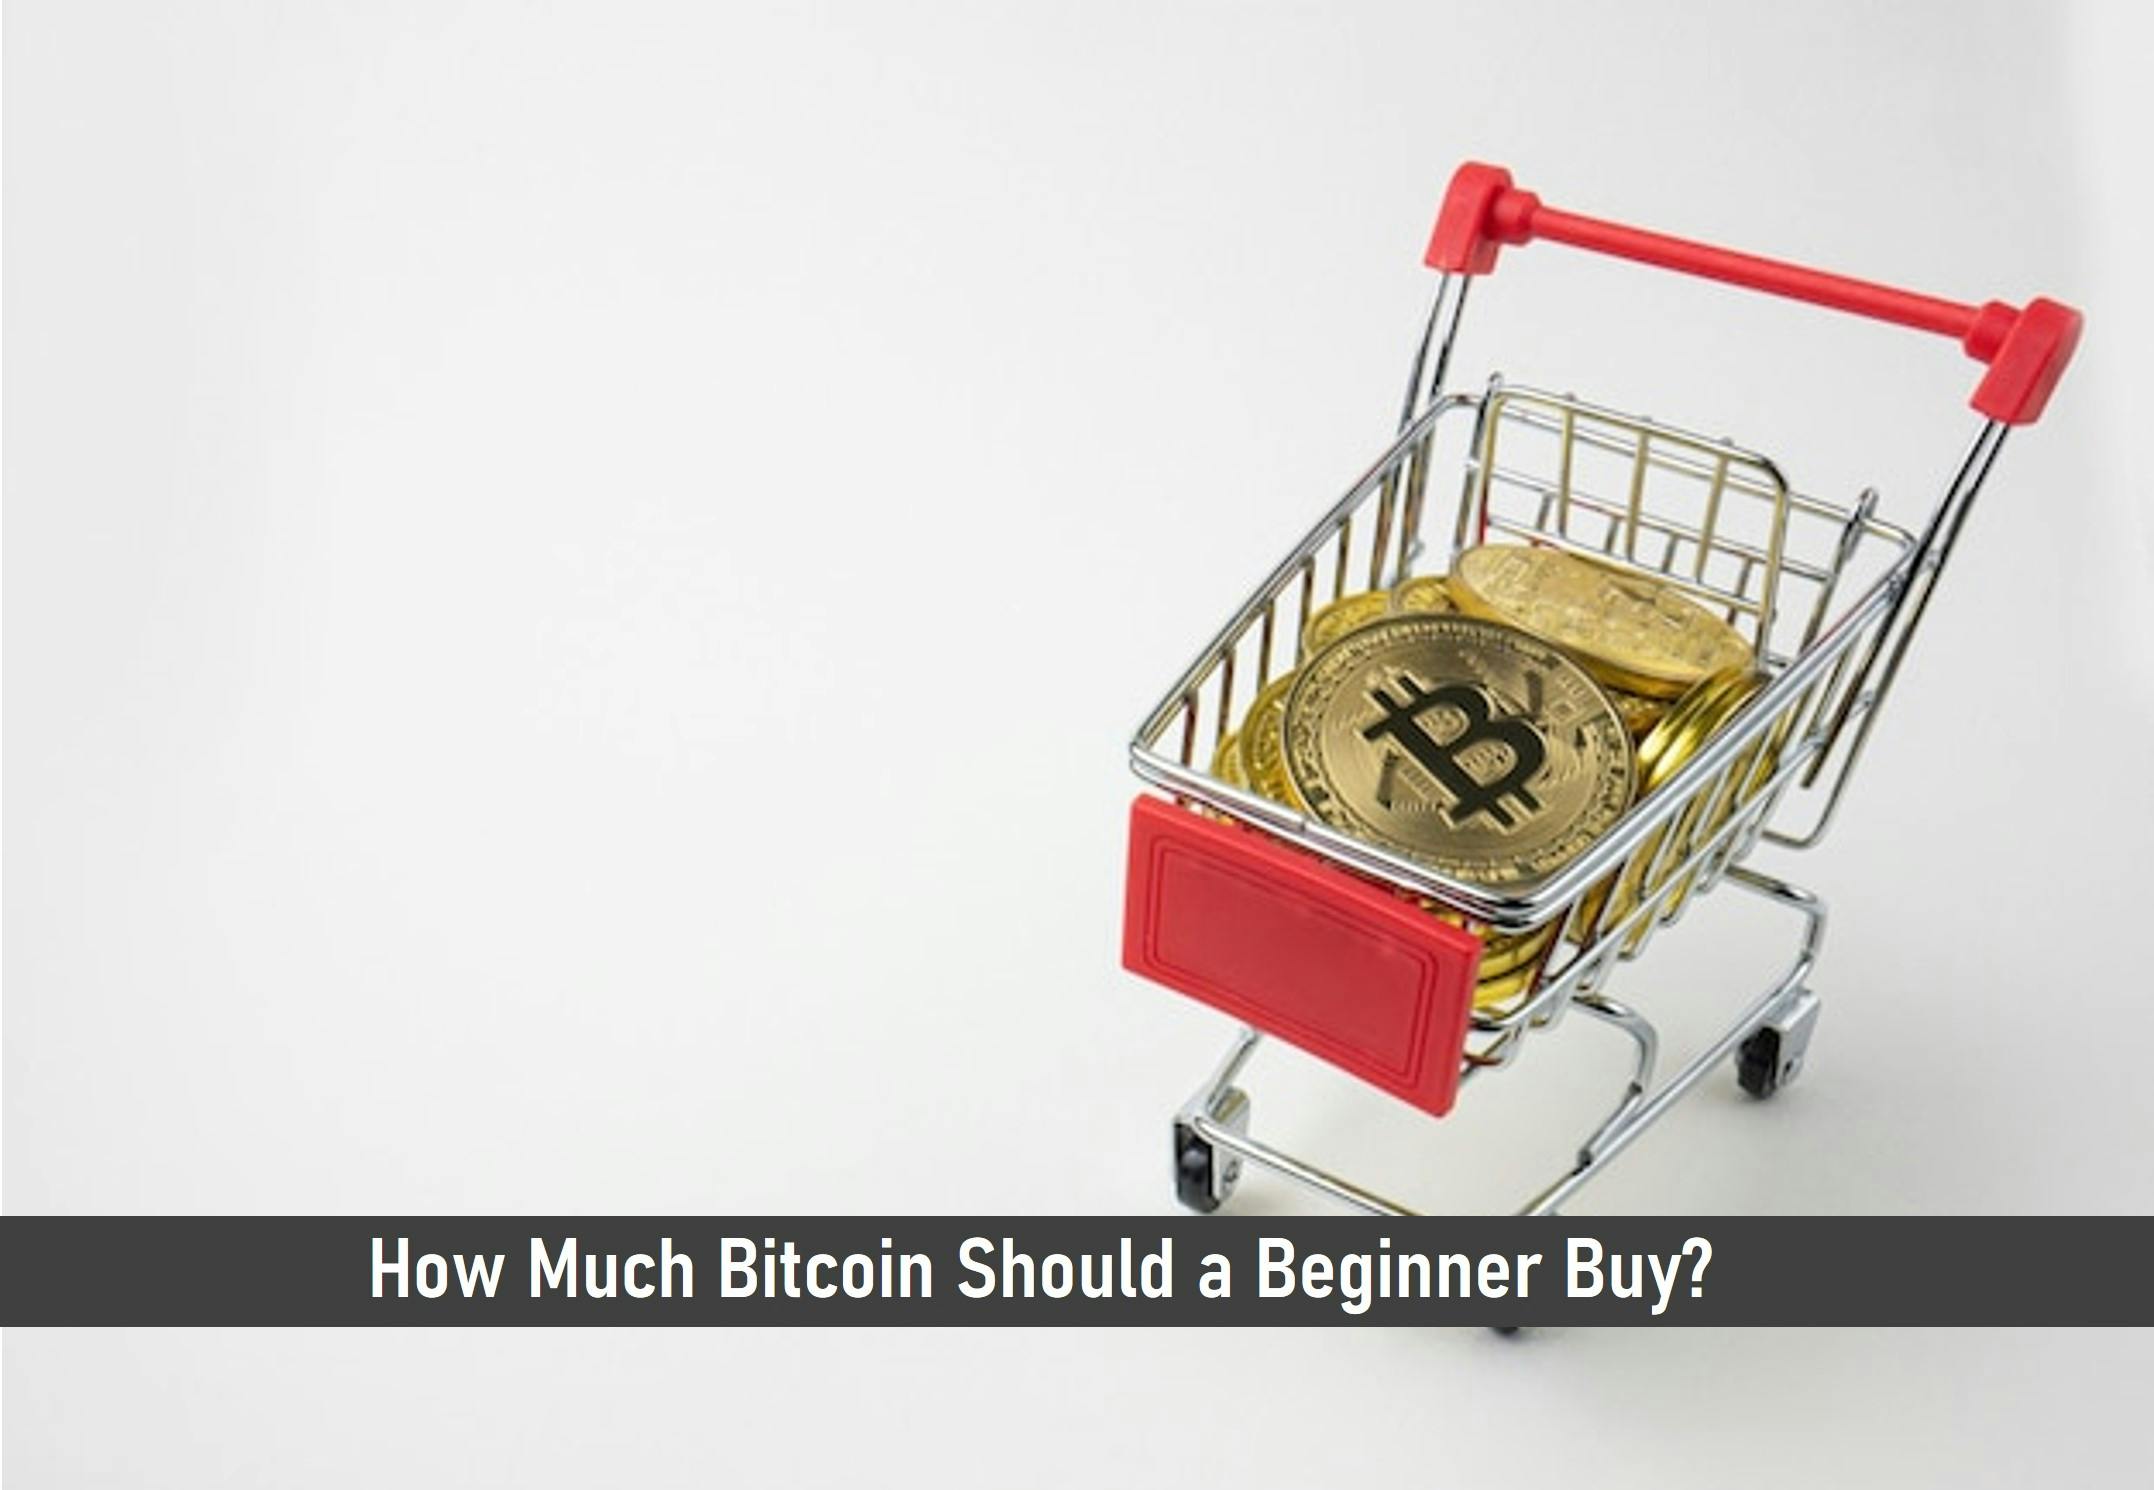 How Much Bitcoin Should a Beginner Buy?